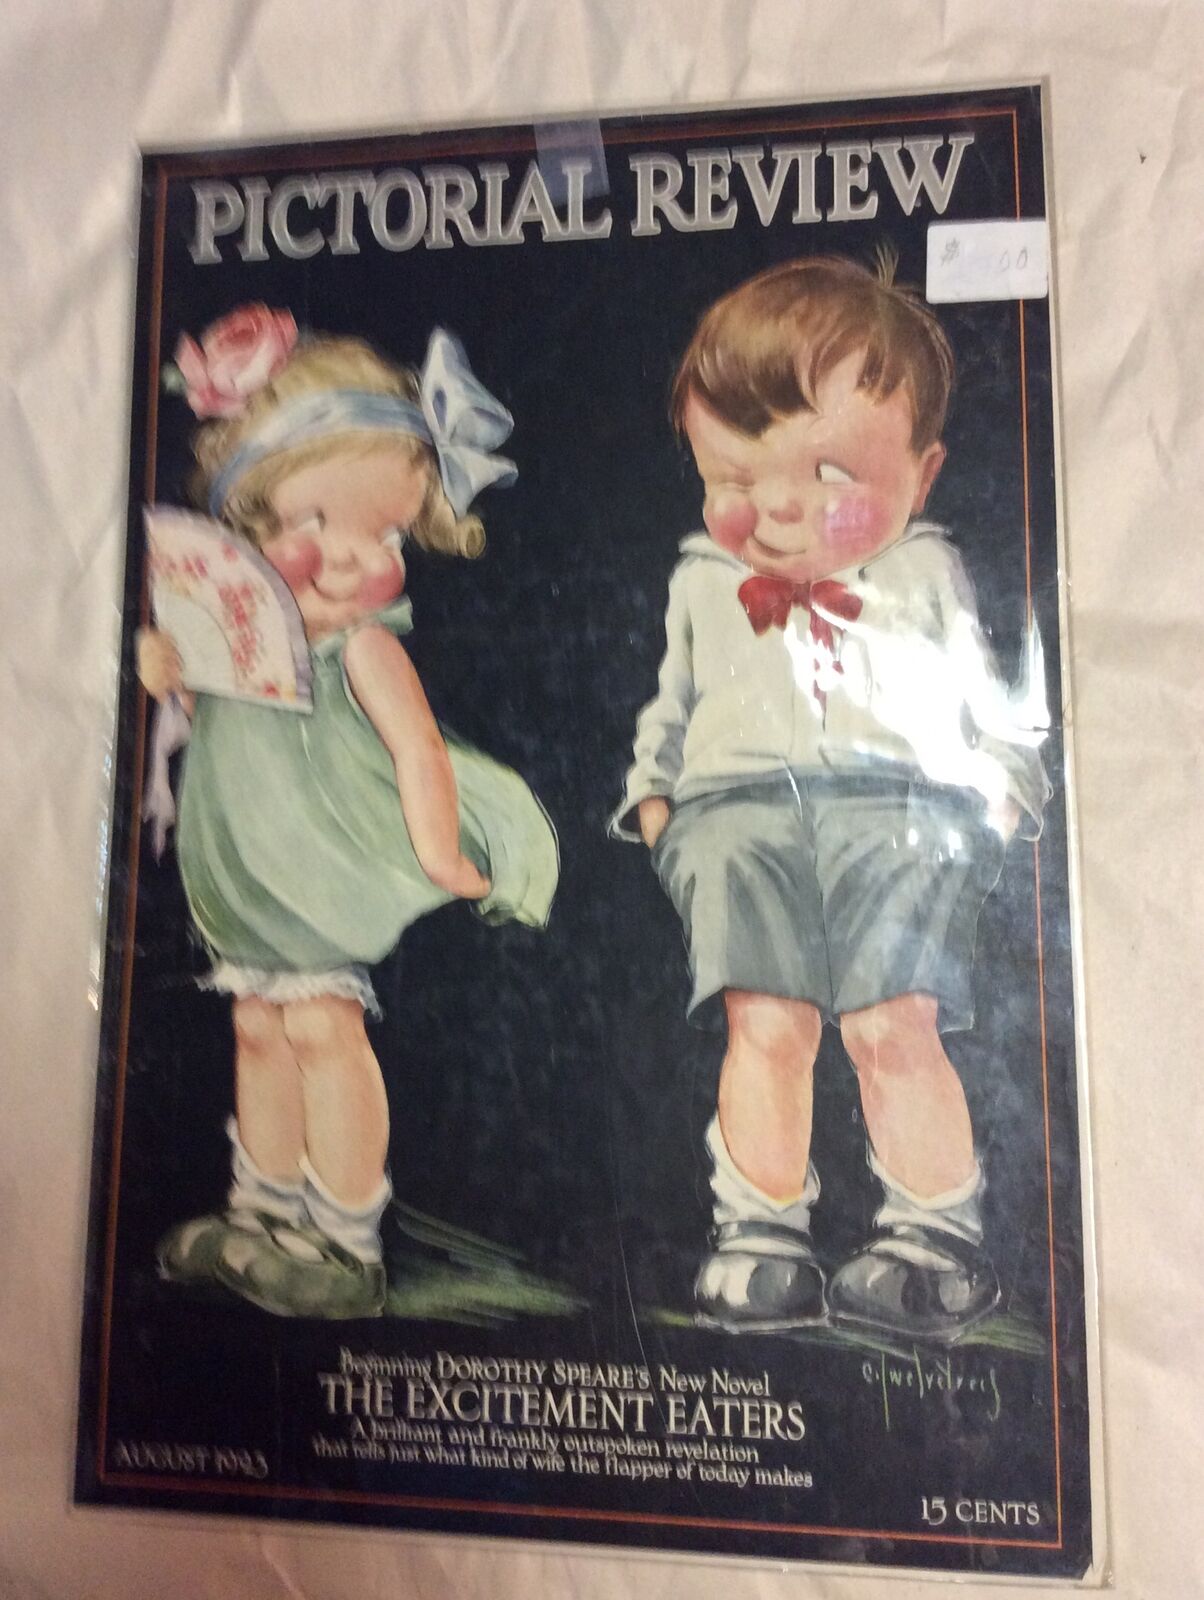 Vintage Pictorial Review Poster August 1923